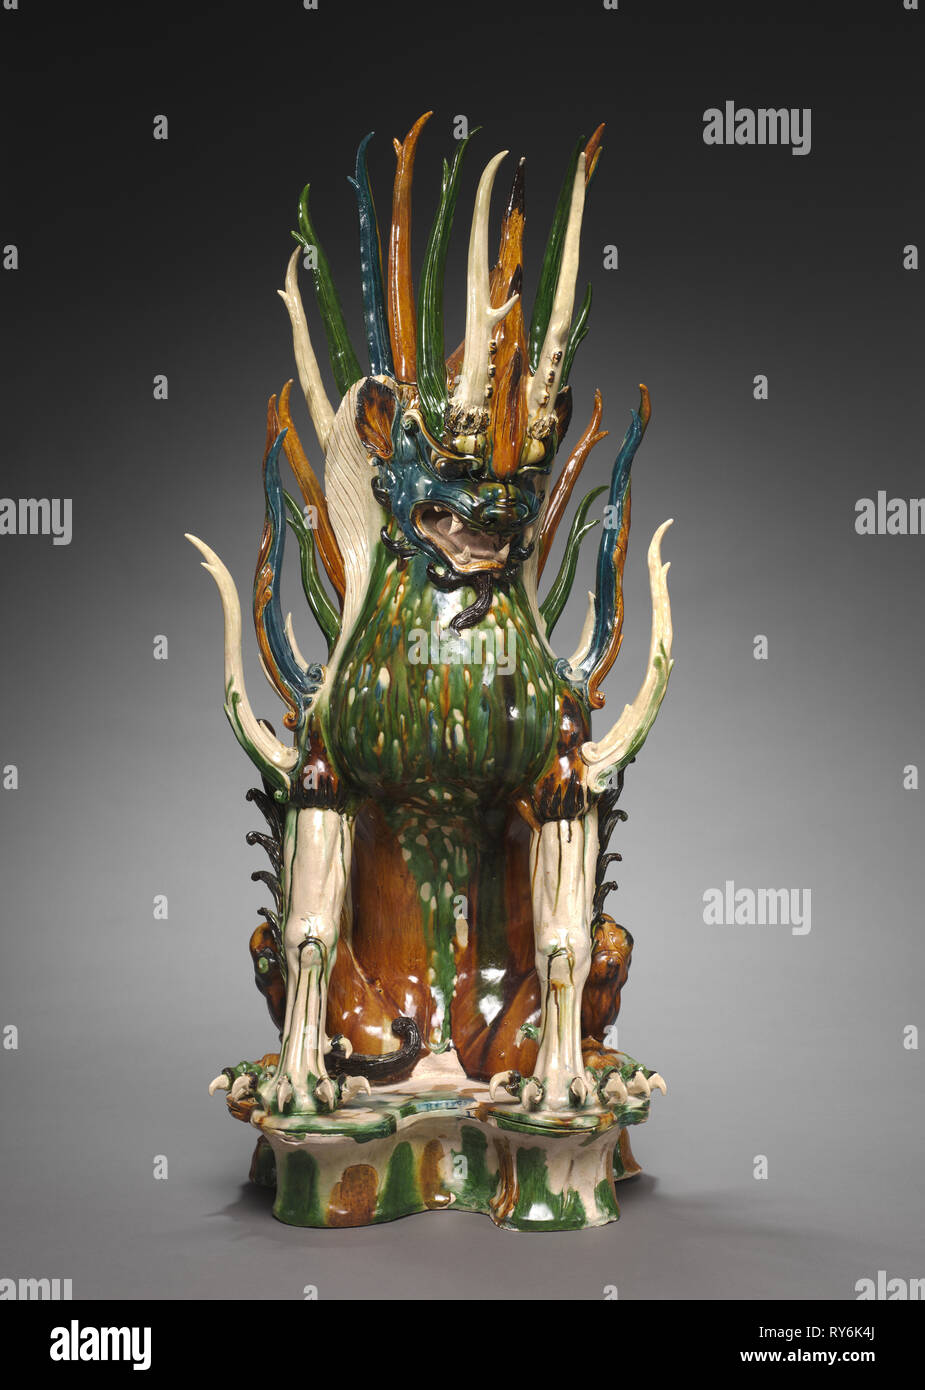 Tomb Guardian with Animal Head, early 700s. China, probably Shaanxi province, Xi'an, Tang dynasty (618-907). Glazed earthenware, sancai (three-color) ware; overall: 92.3 x 43.8 x 41.9 cm (36 5/16 x 17 1/4 x 16 1/2 in Stock Photo